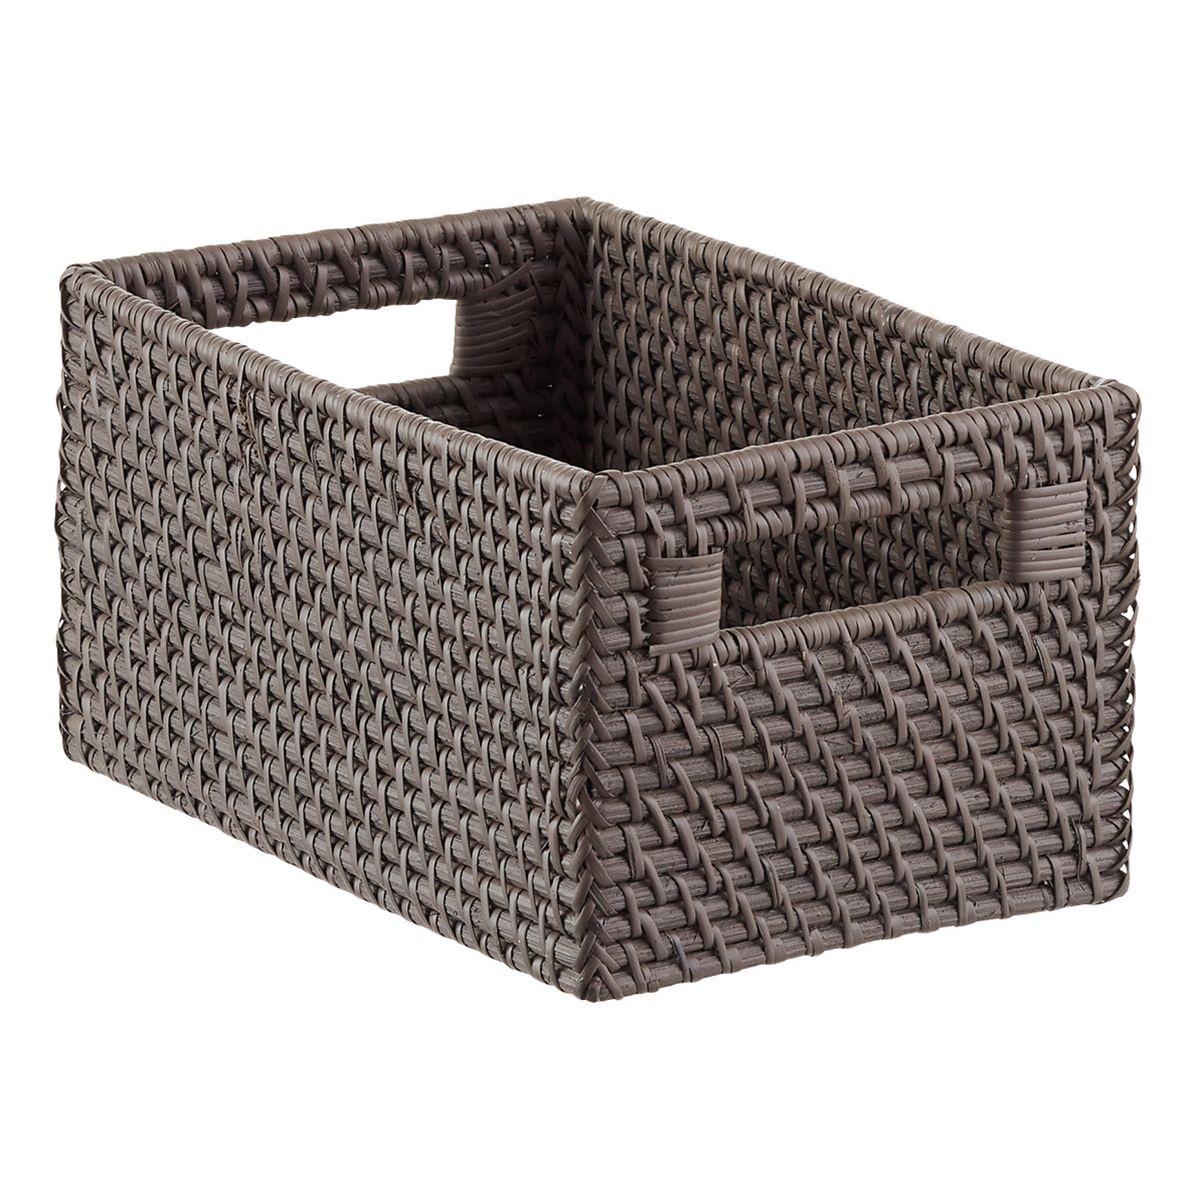 Rattan Bin w/ Handles | The Container Store